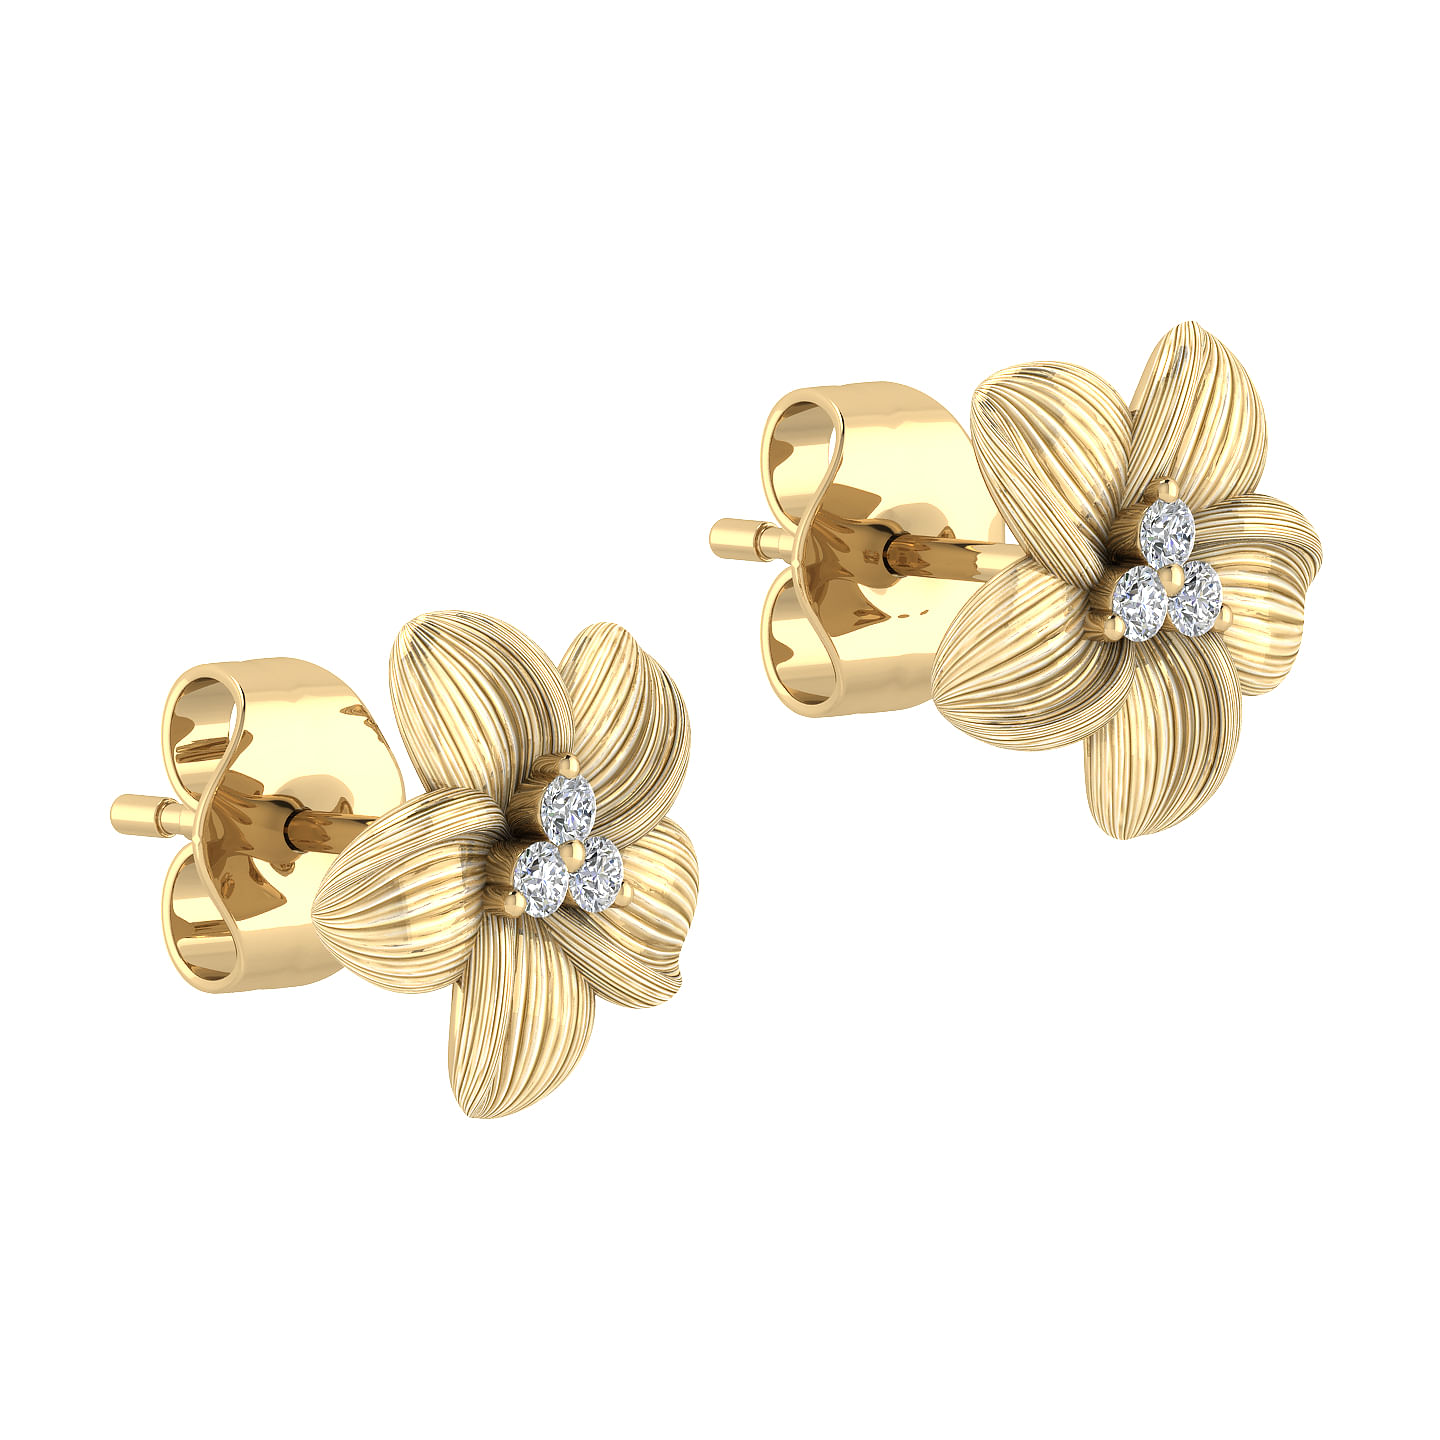 14K Yellow Gold Textured Flower and Diamond Stud Earrings